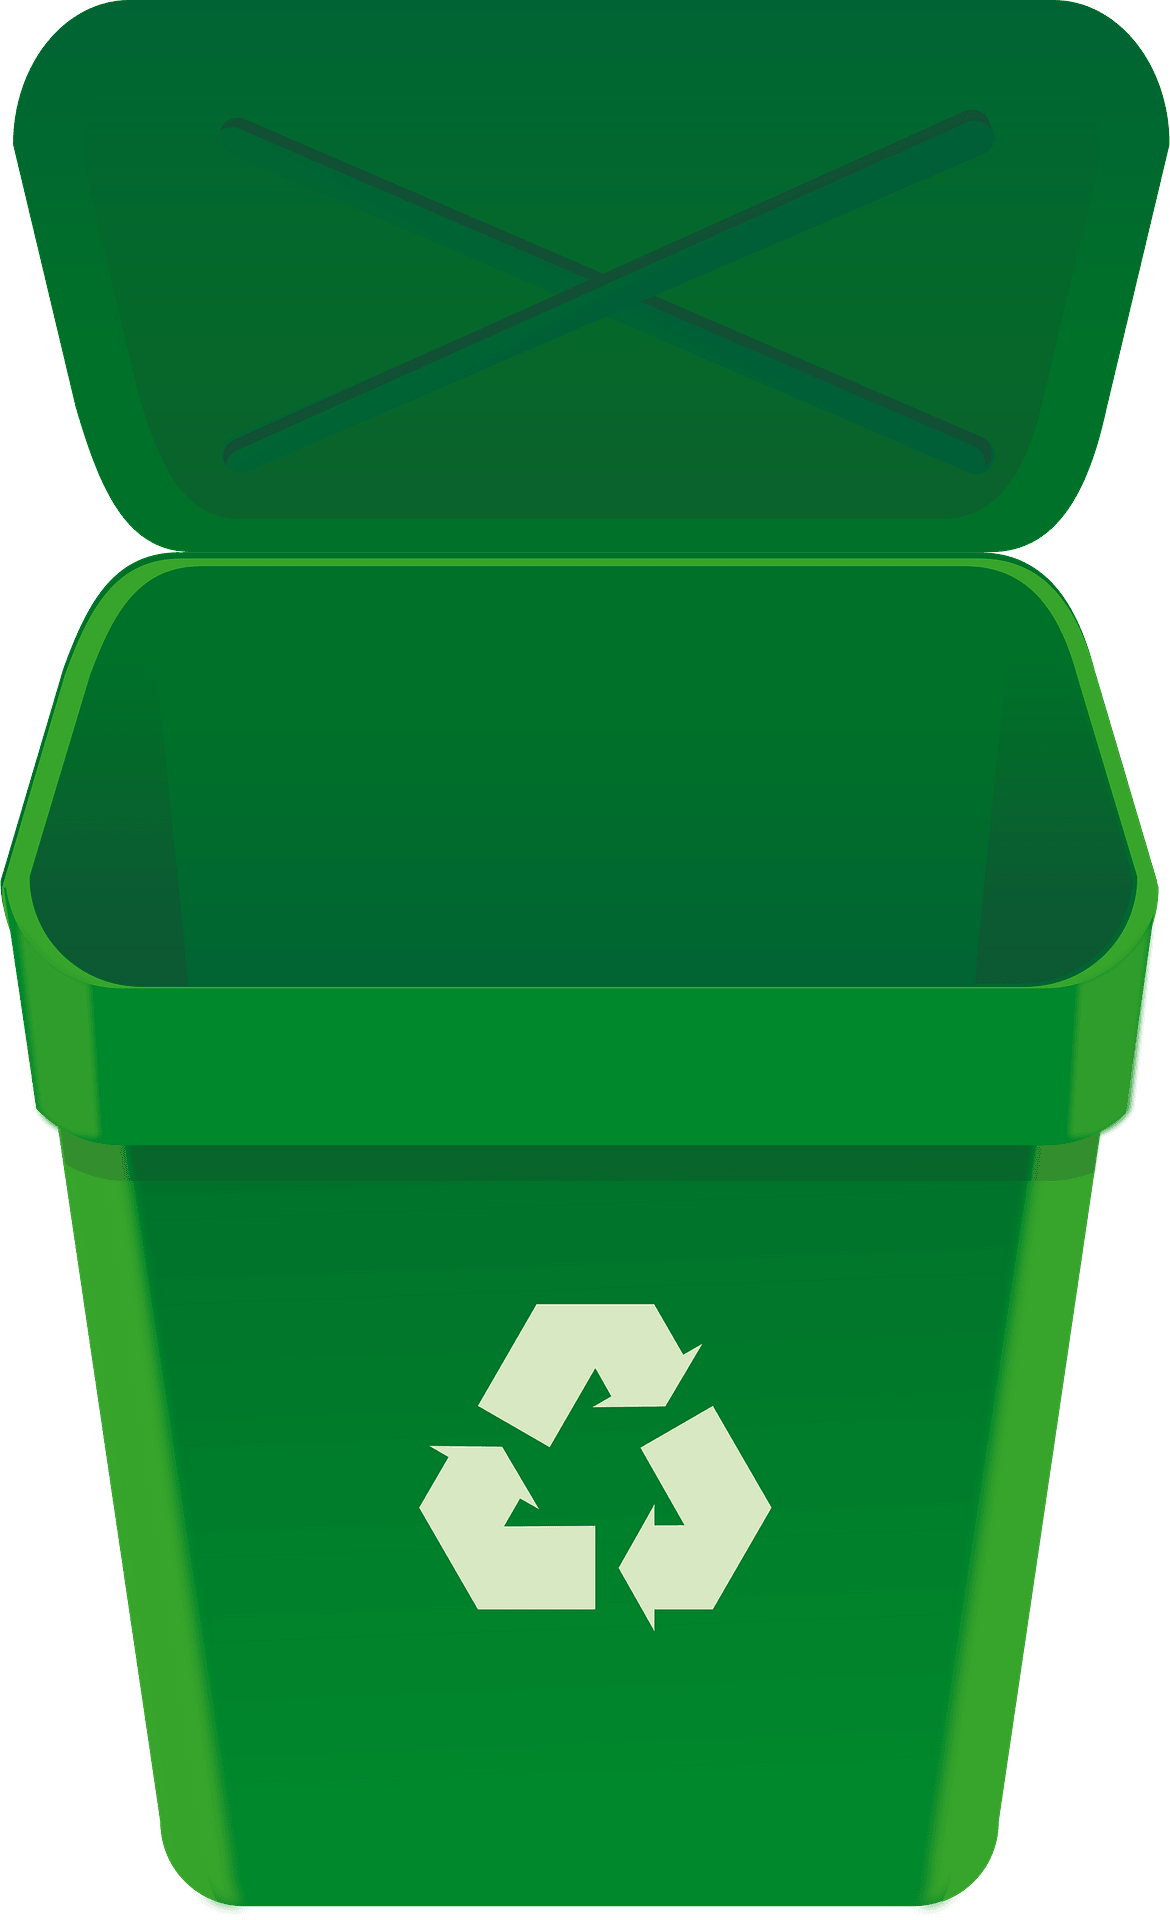 Green Empty Recycle Bin Transparent Image